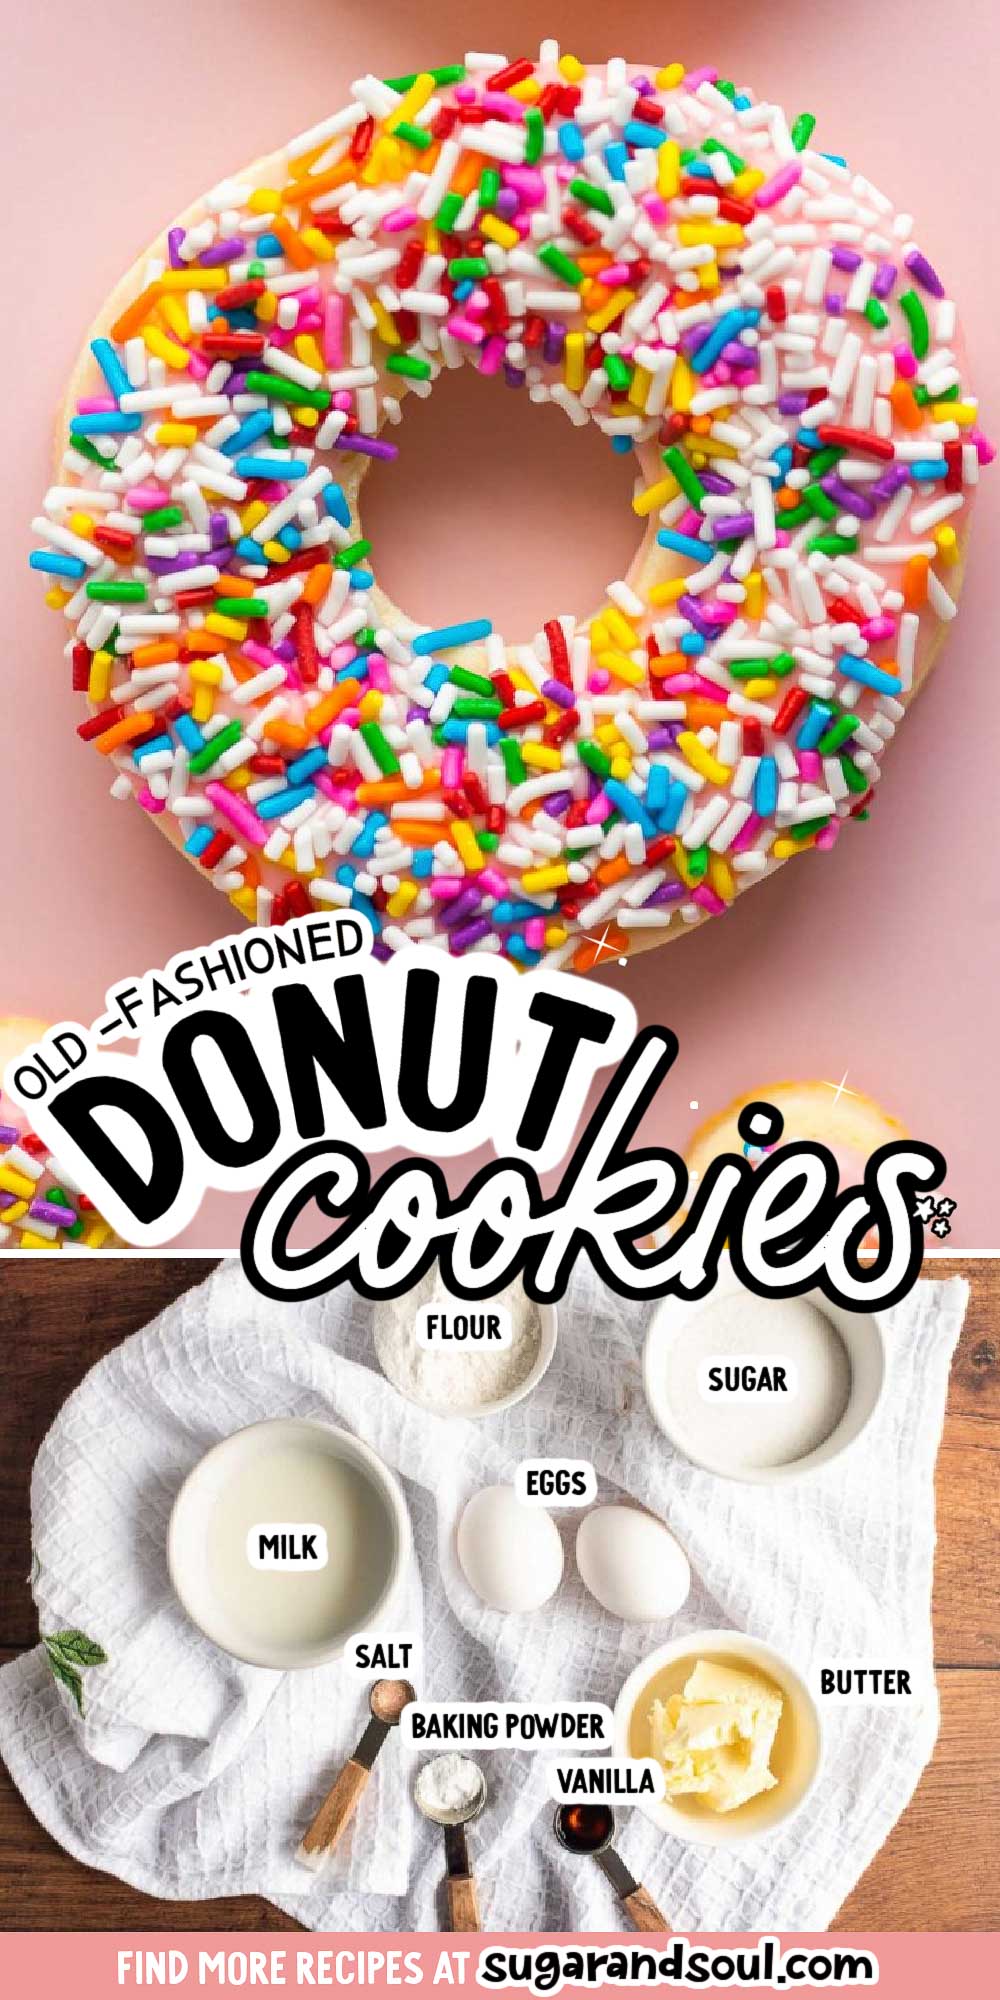 These Donut Cookies are soft, lightly sweetened cookies that are covered in easy-to-make icing and then topped with fun colorful sprinkles! An old-fashioned recipe made with basic ingredients the whole family will love! via @sugarandsoulco